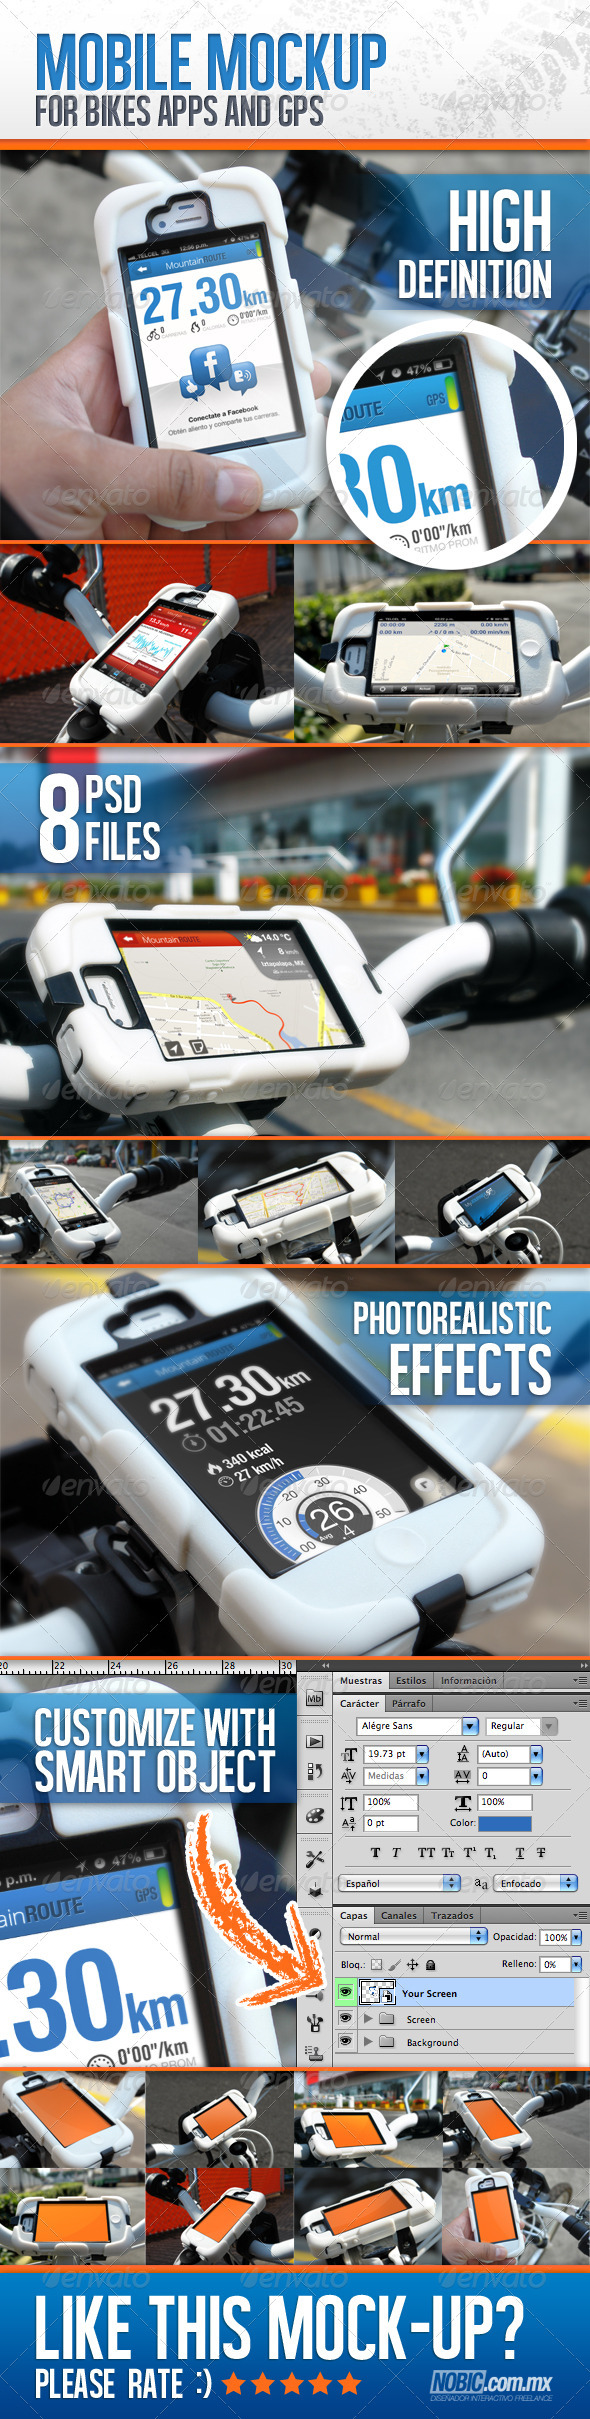 Bike Mockup for Apps and GPS Devices